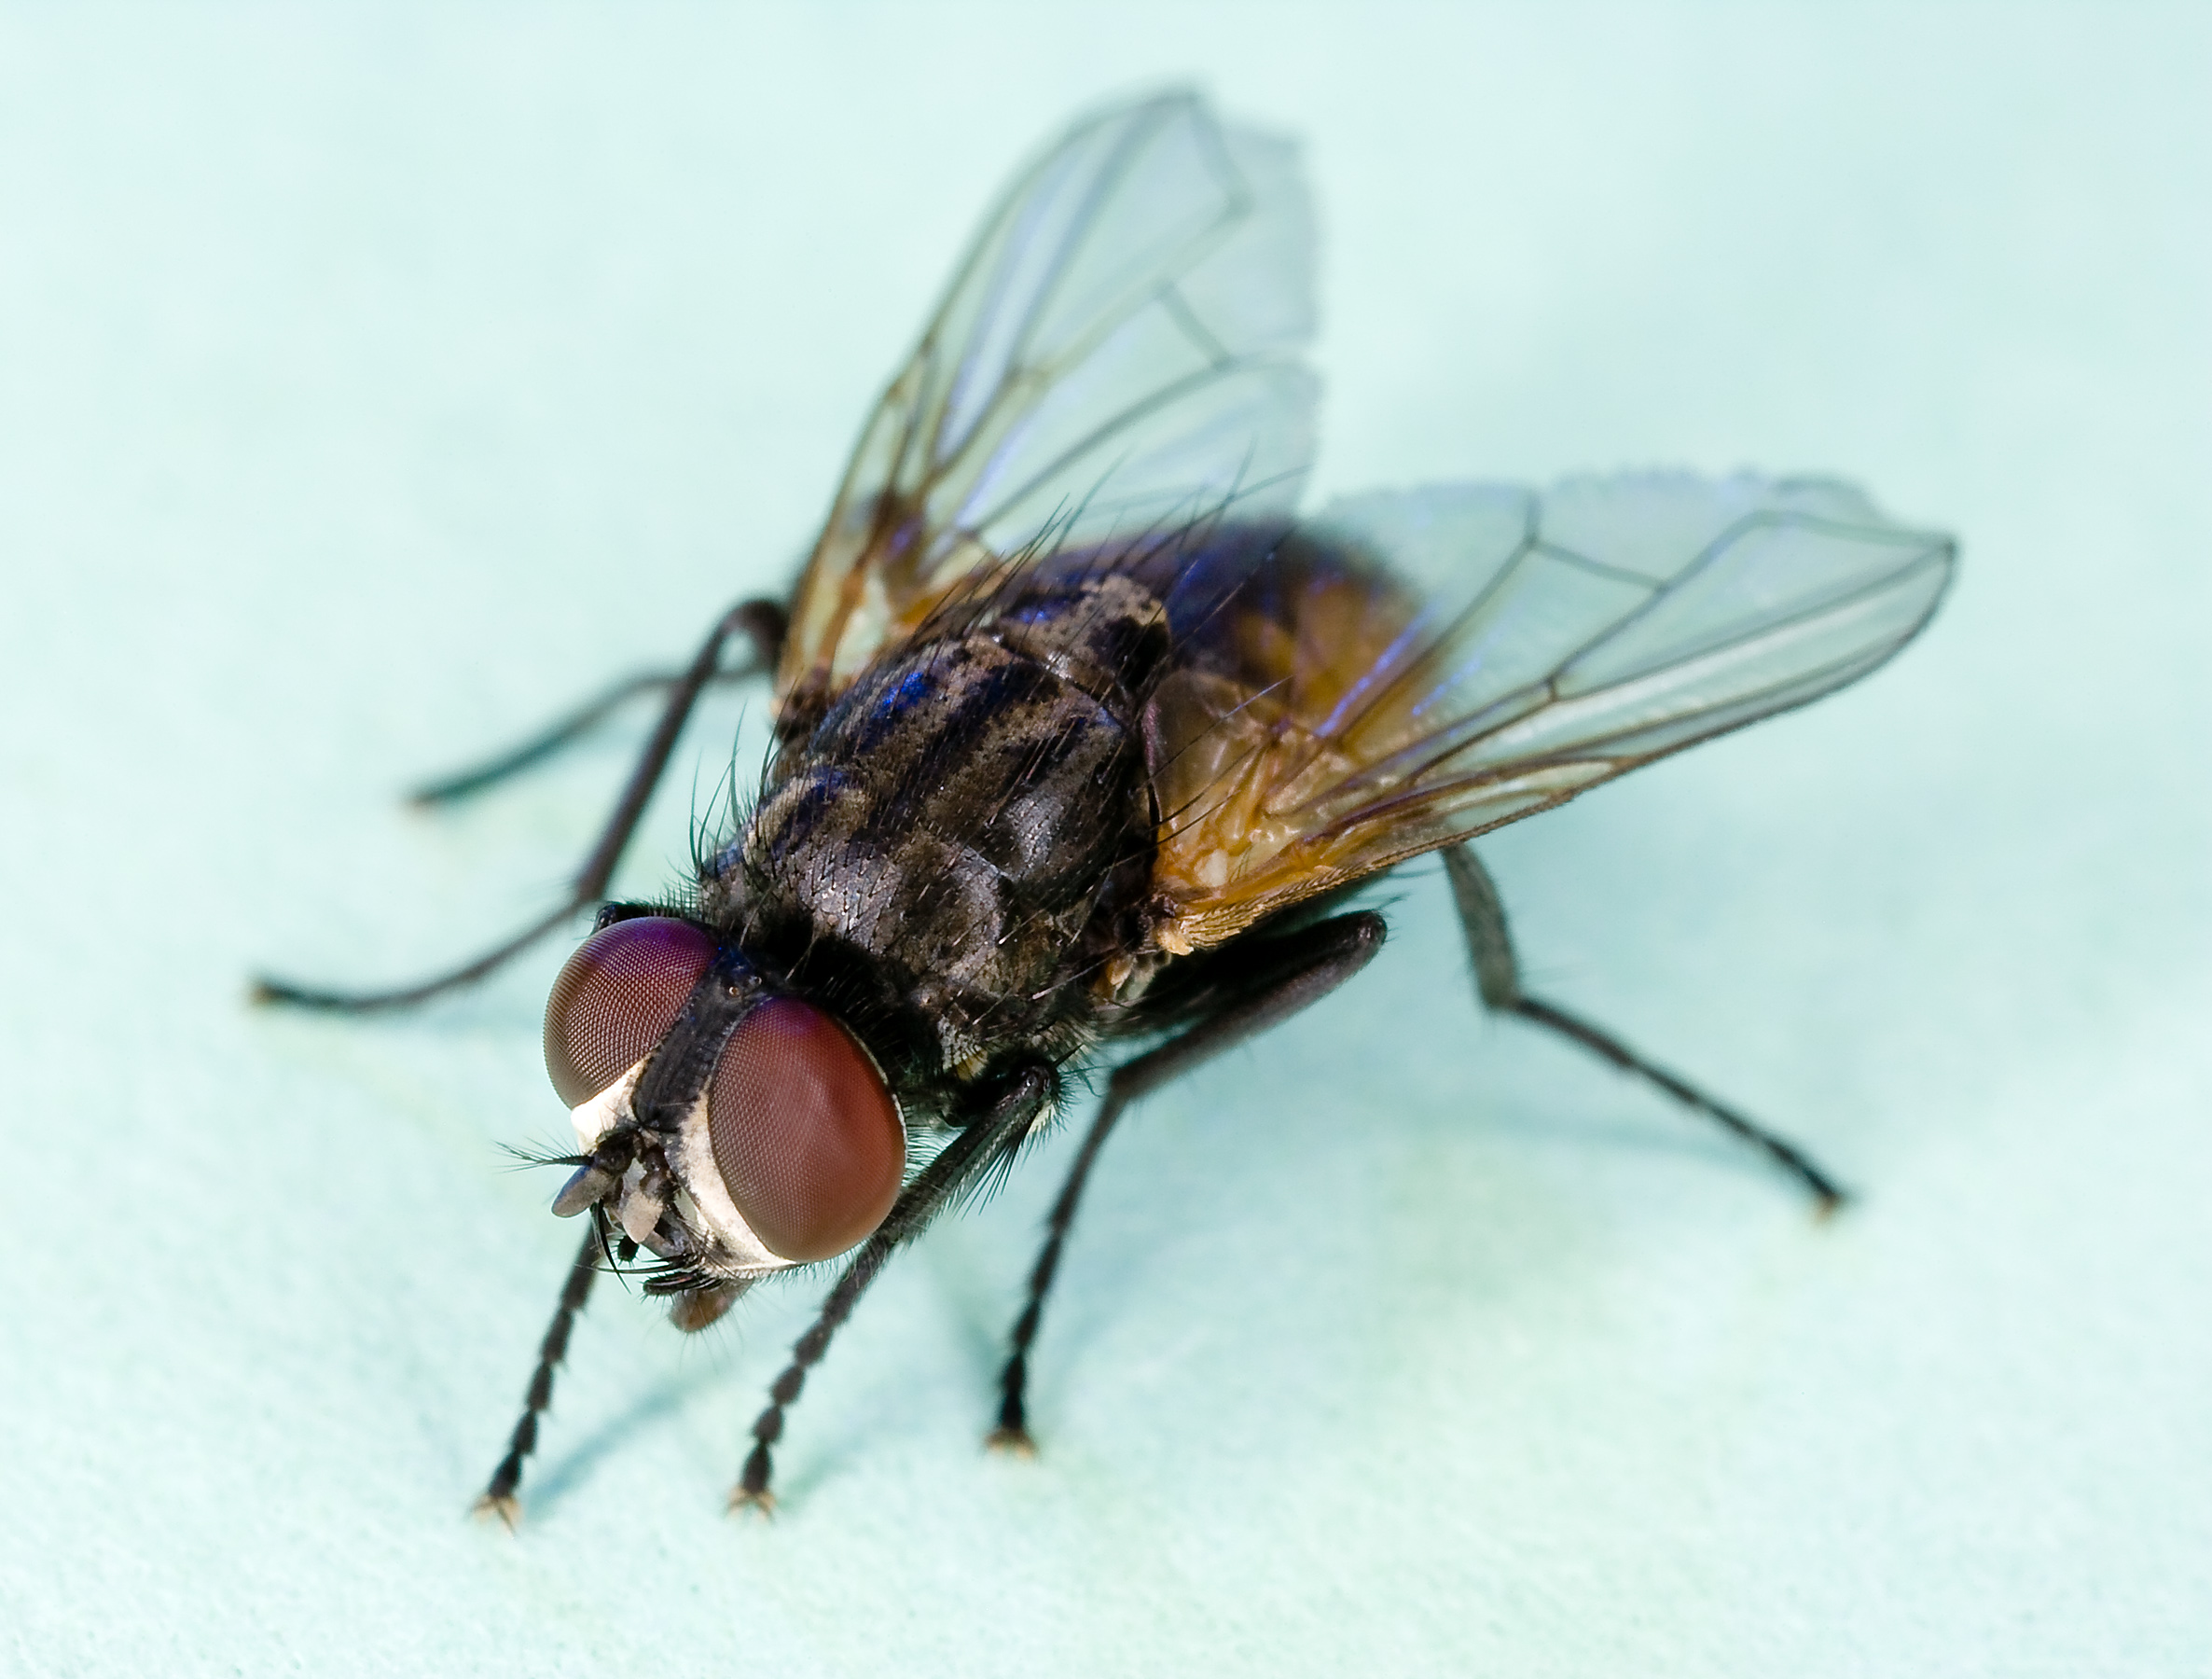 File:Common house fly, Musca domestica.jpg - Wikimedia Commons